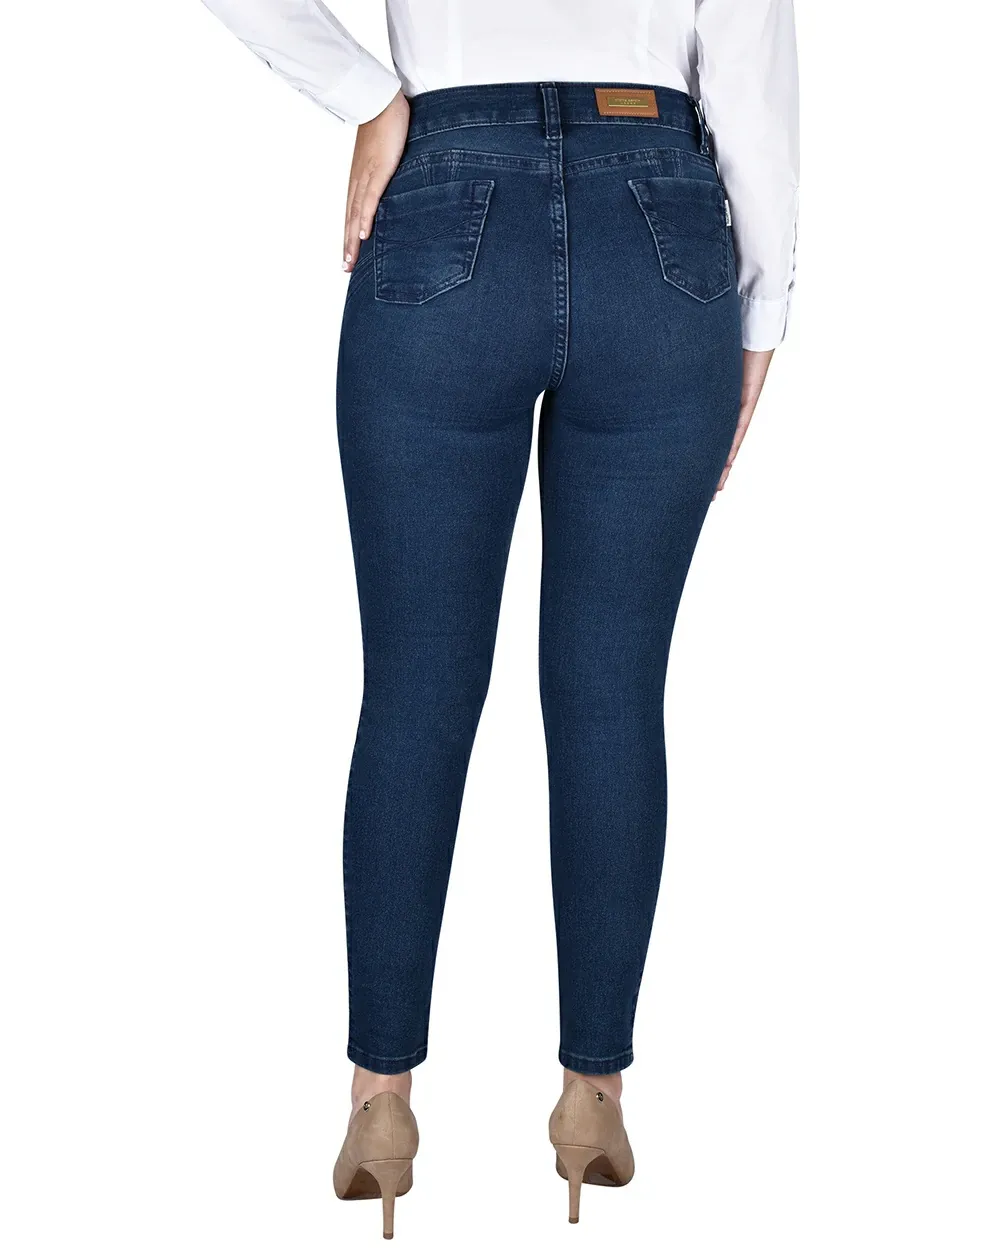 Opposite jeans skinny push up pretina alta 3 botones (color: azul  eléctrico. talla: 42), Delivery Near You